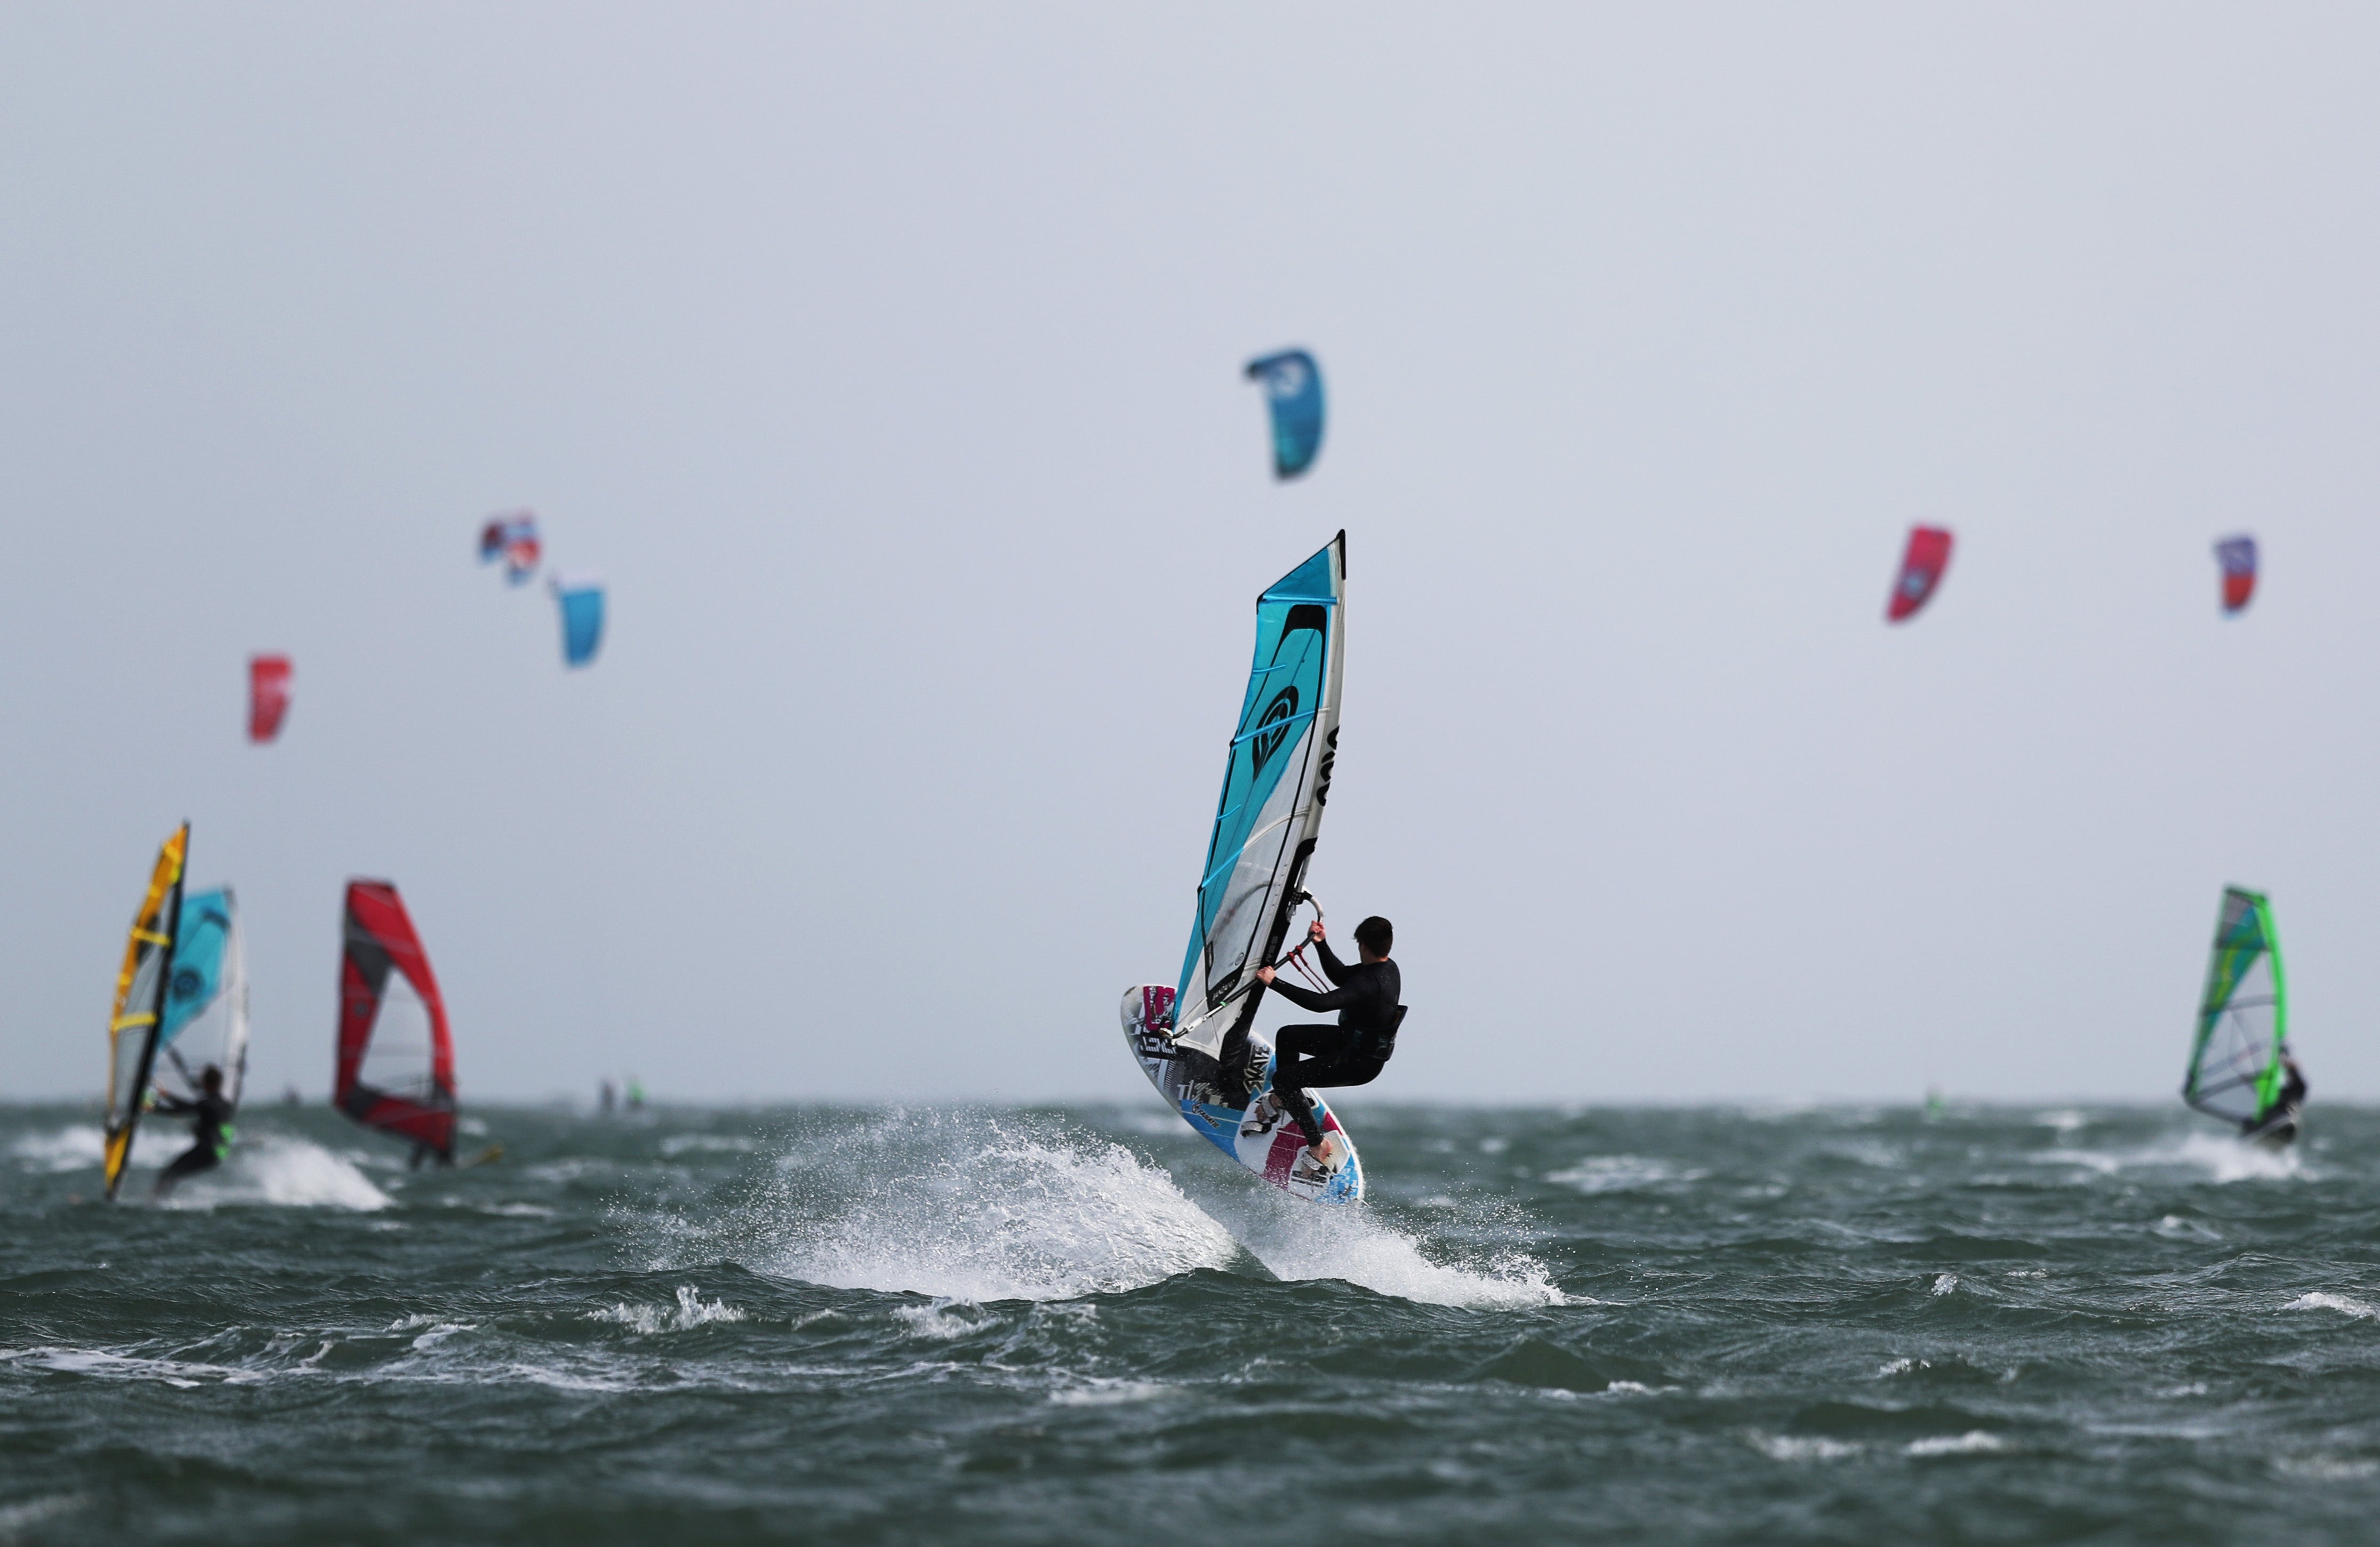 Hayling Island in Hampshire is a watersports hotspot